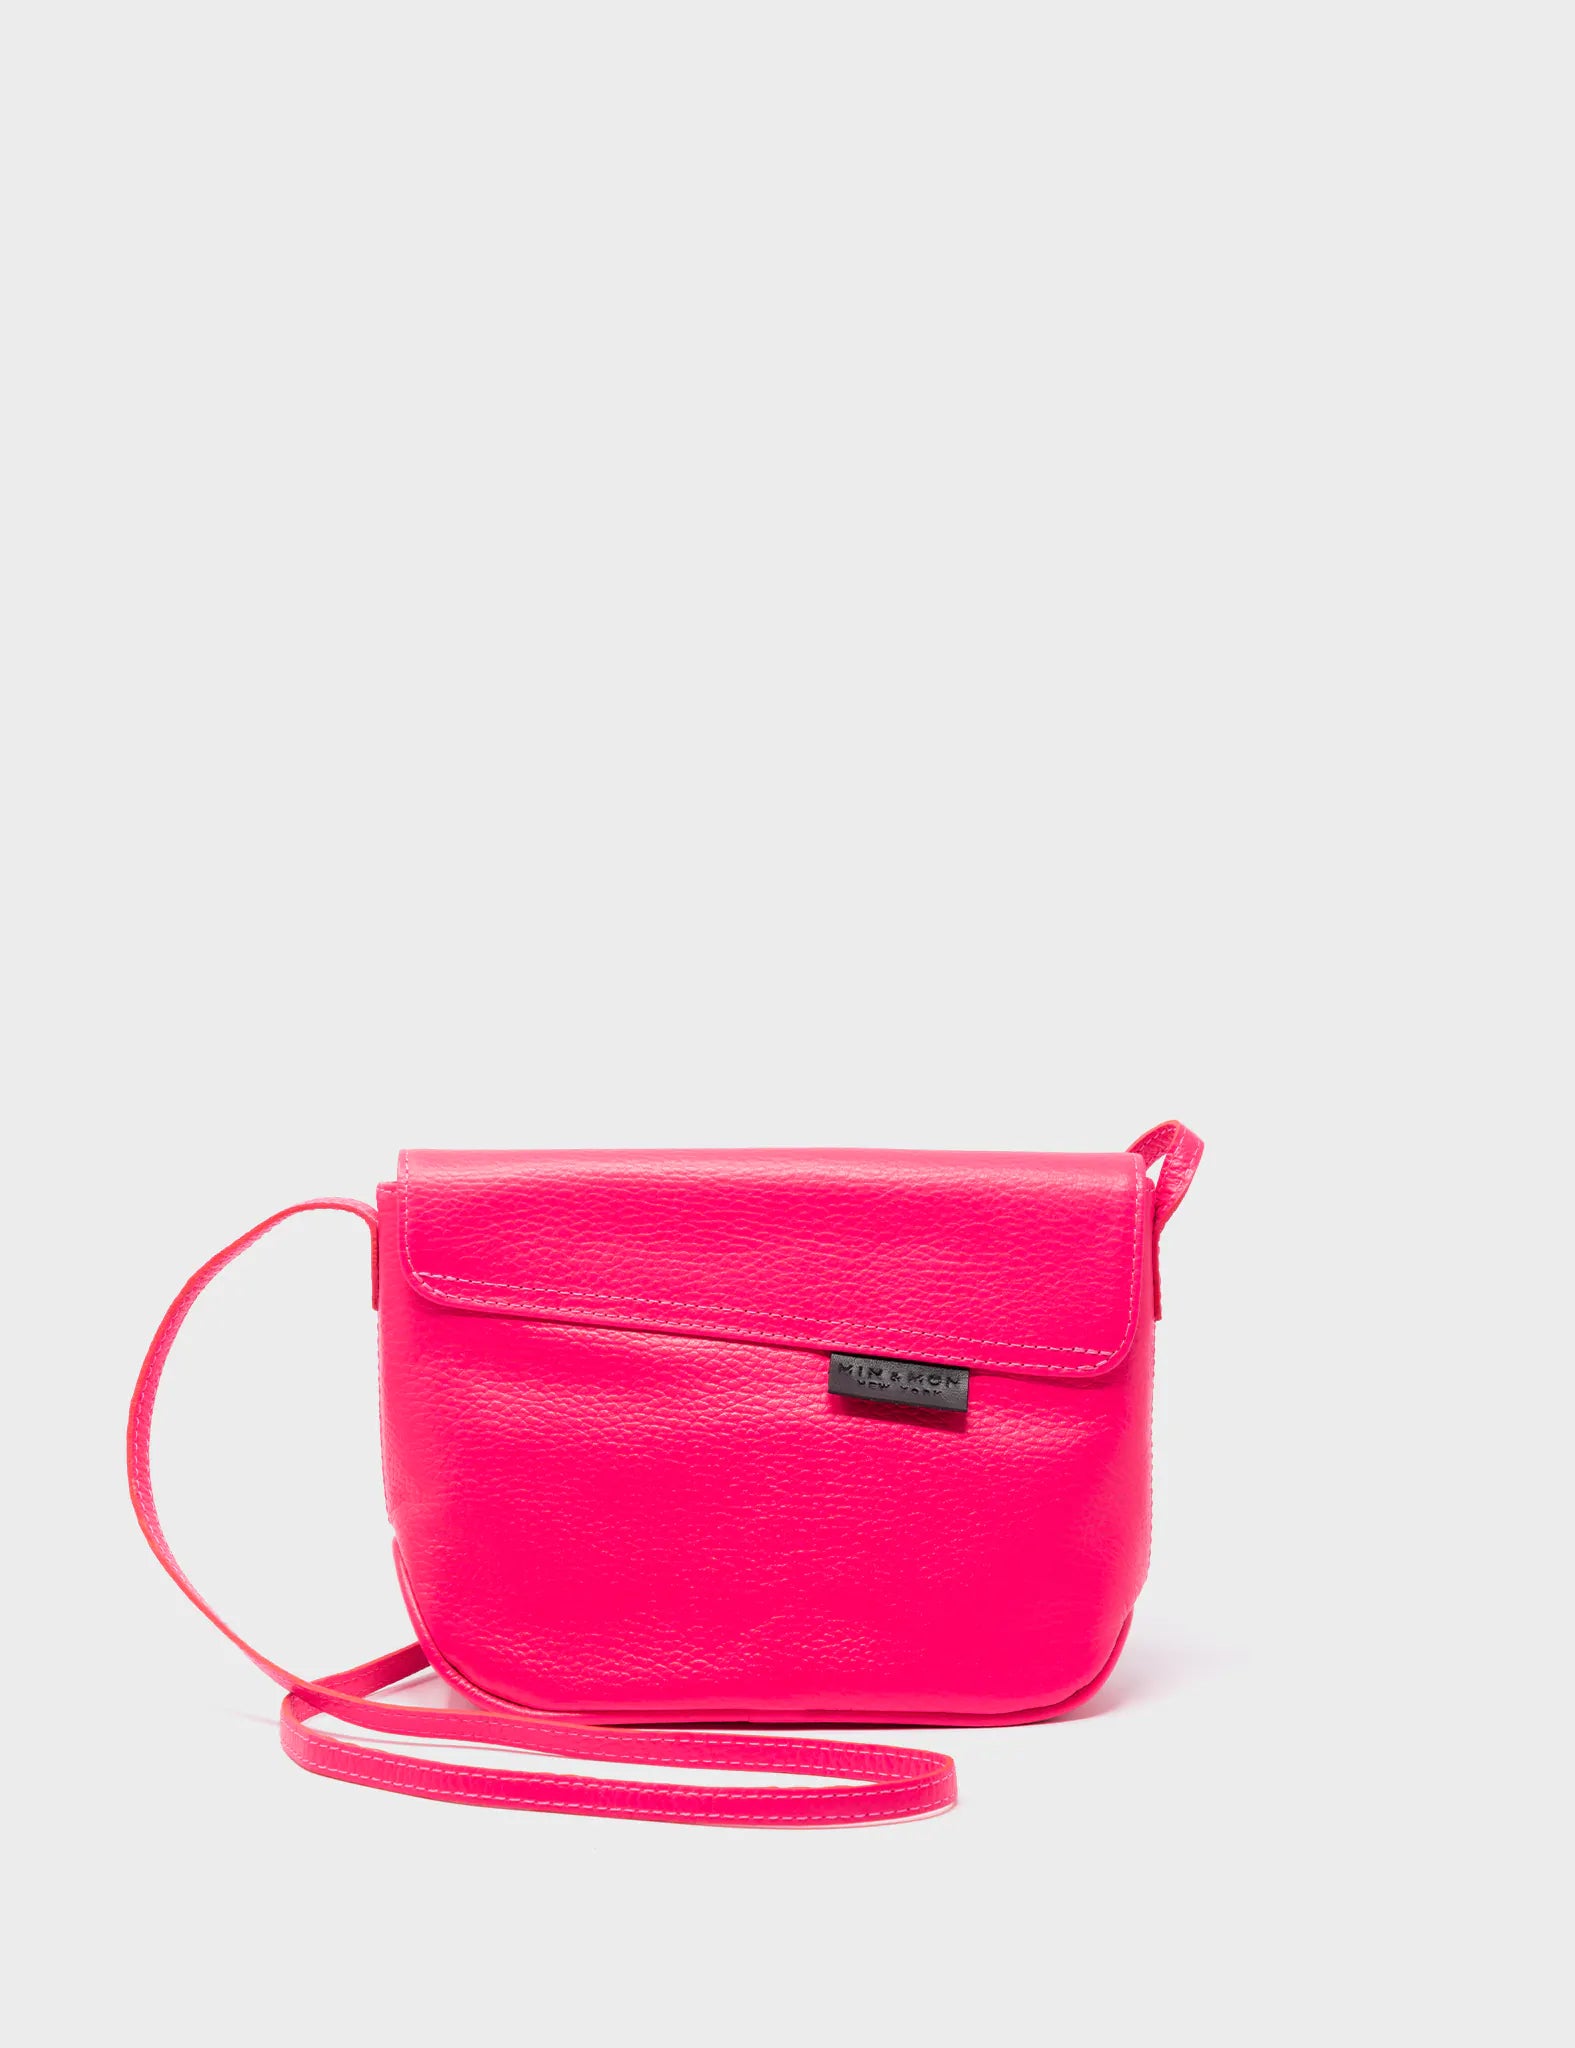 Bruno Mini Crossbody Neon Pink Leather Bag - All Over Eyes Embroidery - Back View